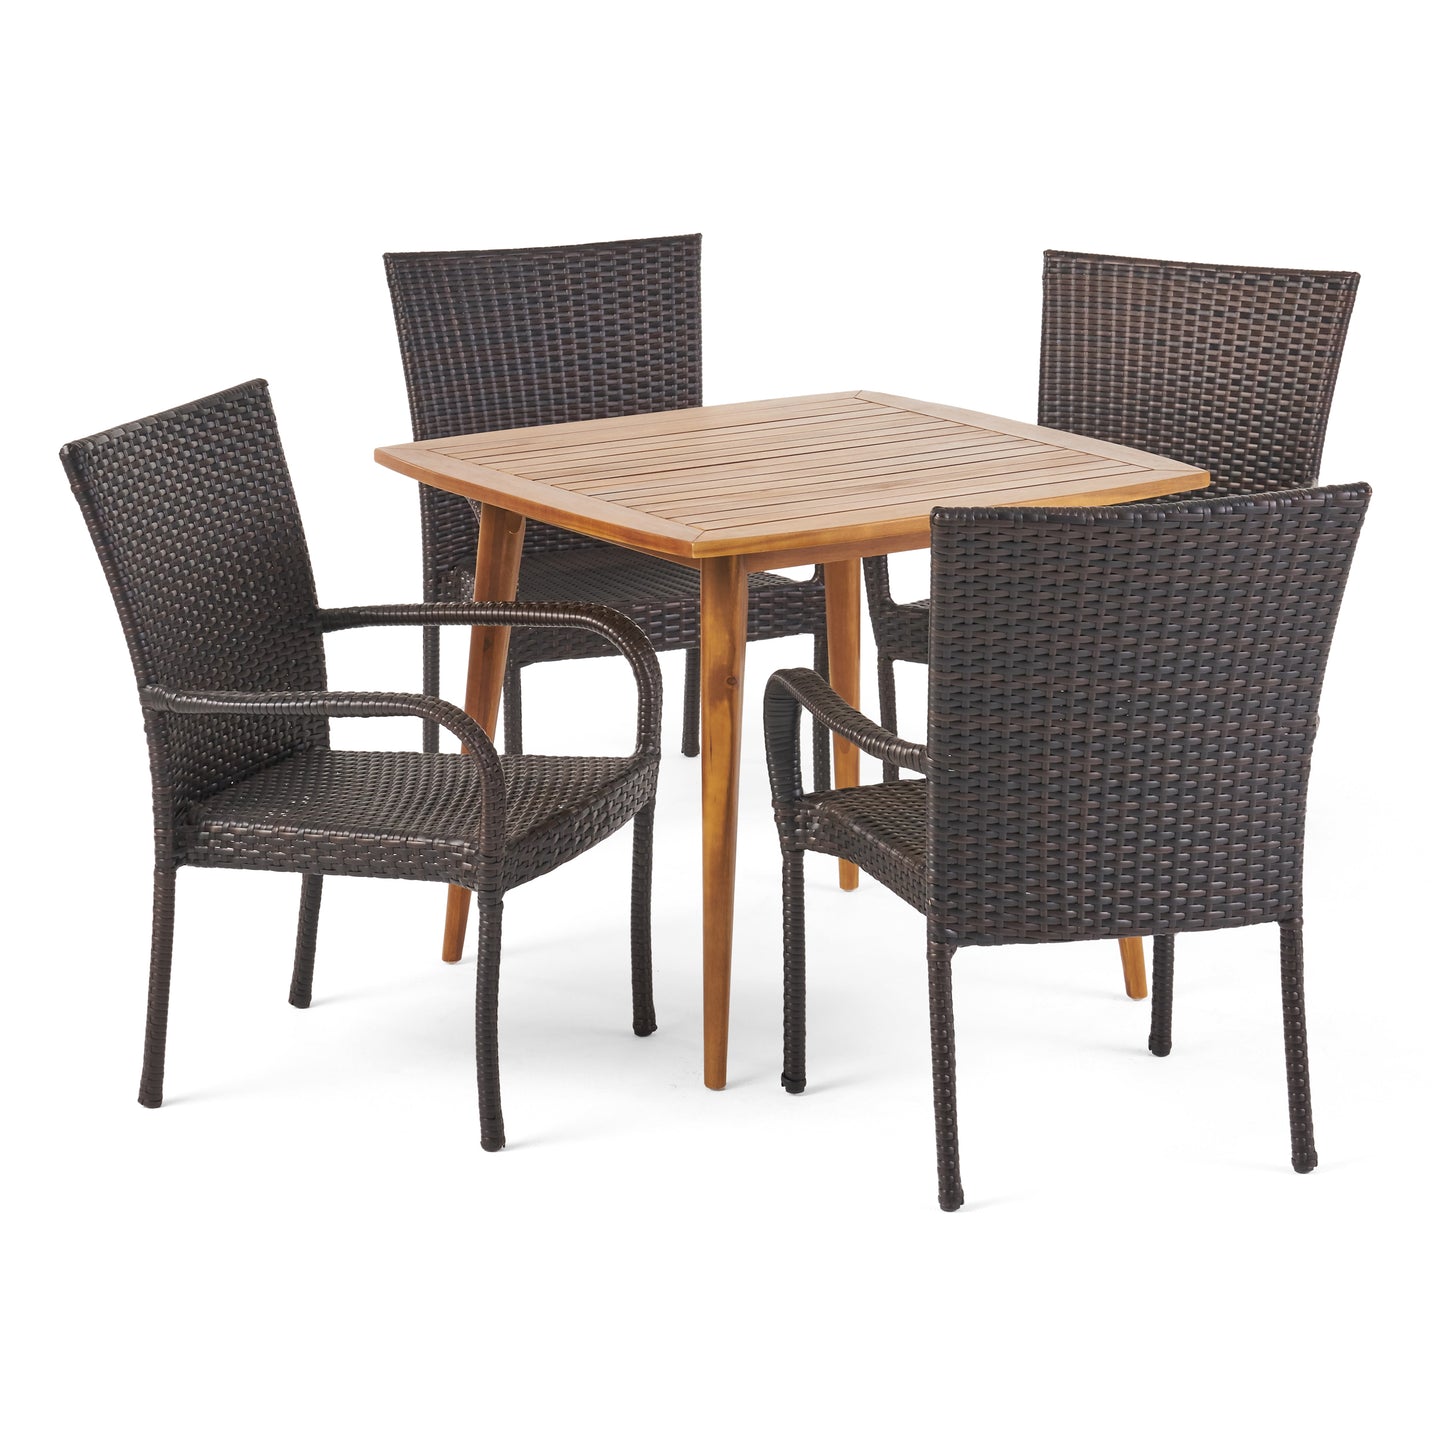 Marsh Outdoor 5 Piece Wood and Wicker Dining Set, Teak and Multi Brown